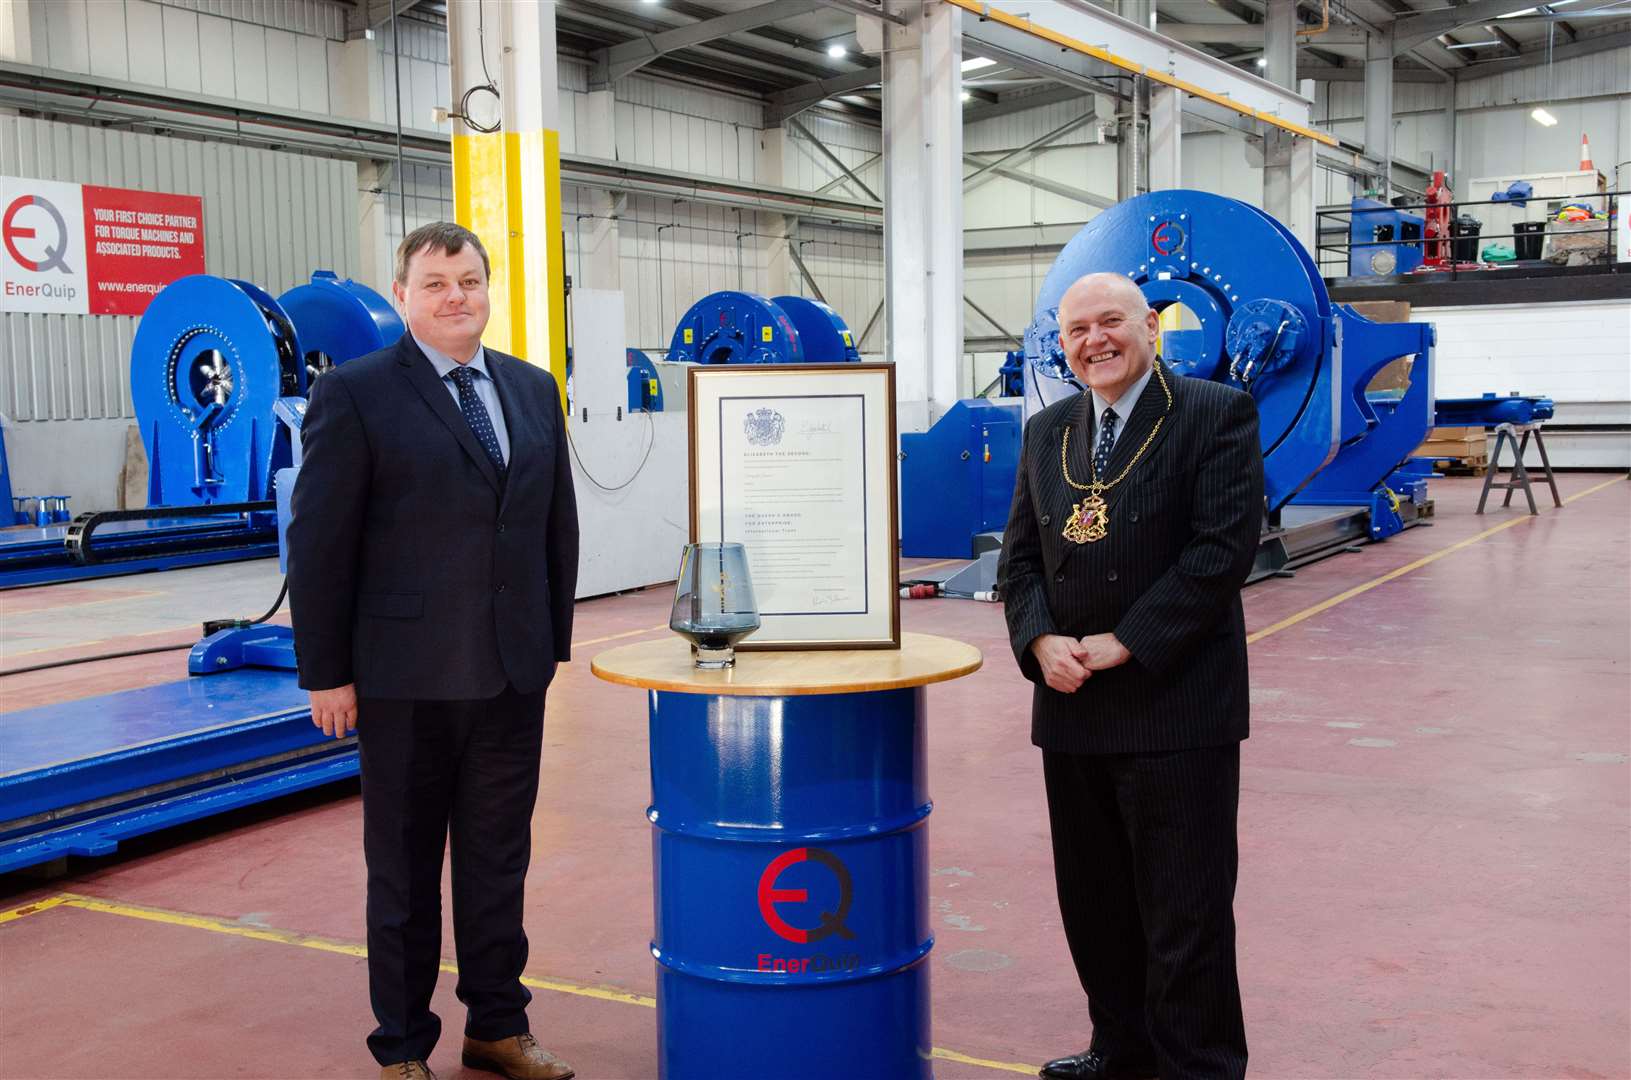 The Lord Provost of Aberdeen, Barney Crockett (right), in his role as Lord-Lieutenant, with EnerQuip chairman Andrew Polson.